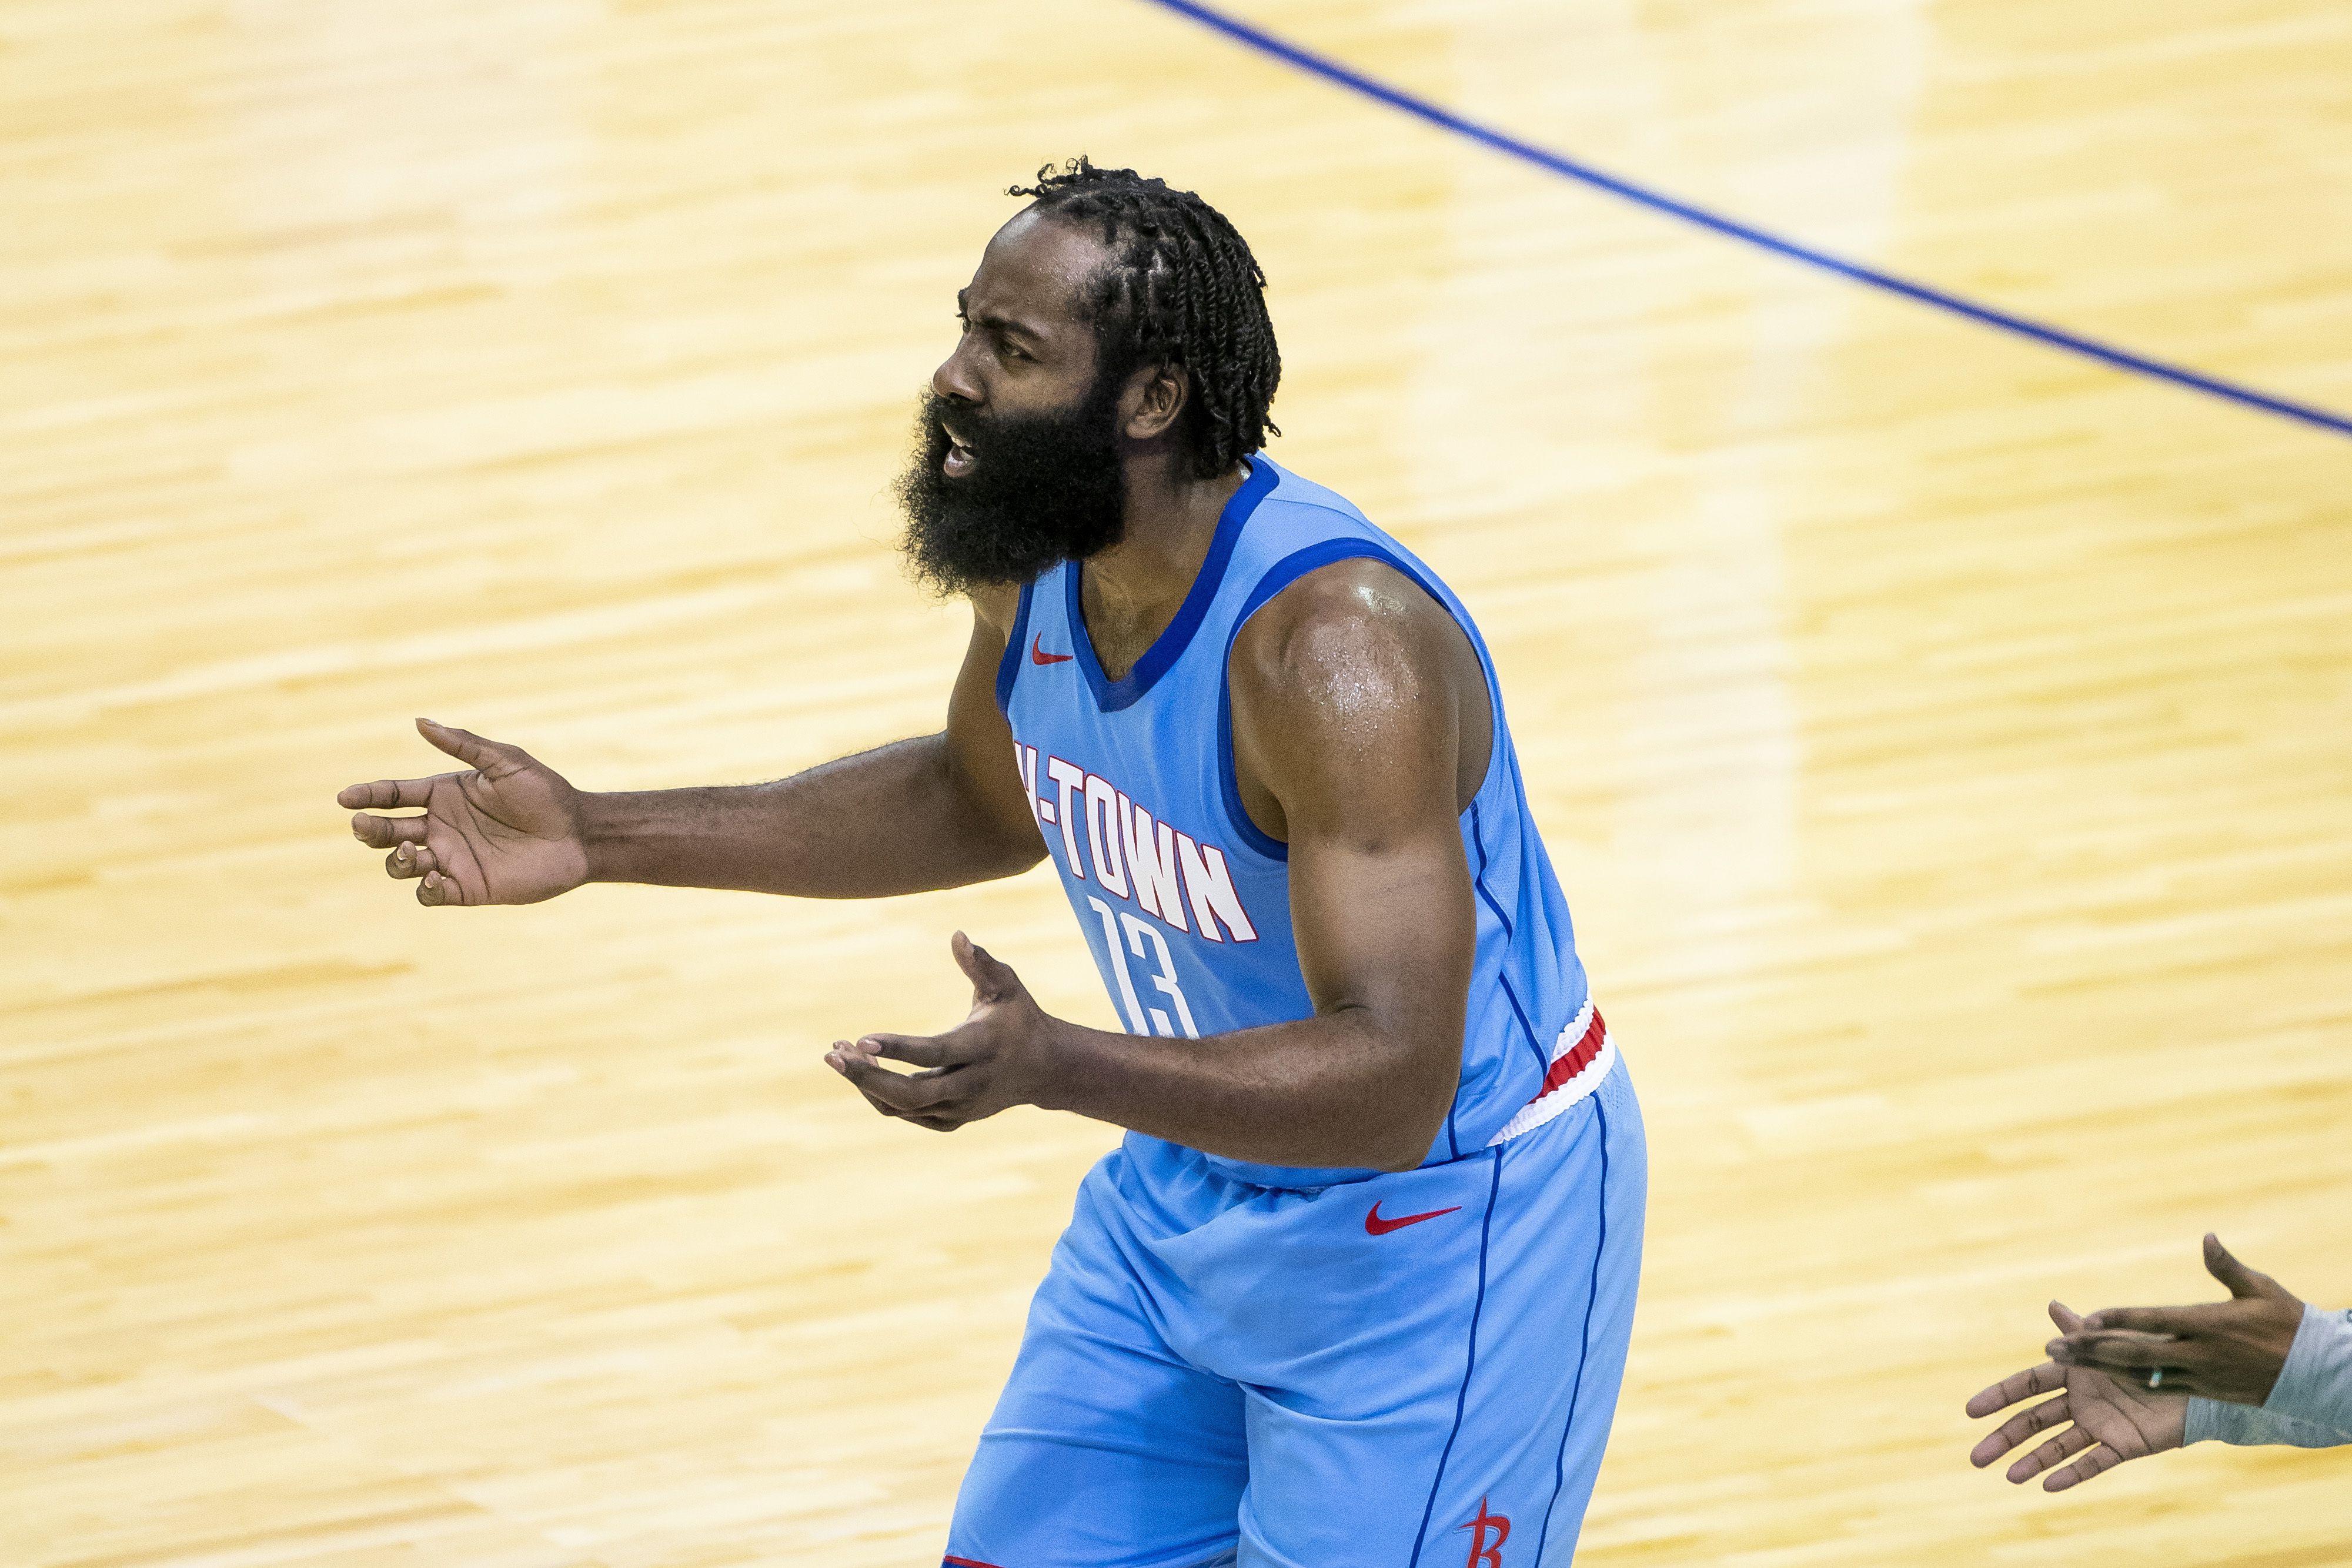 James Harden Shows Russell Westbrook Houston's Fashion Power in Wild  Late-Night Bash